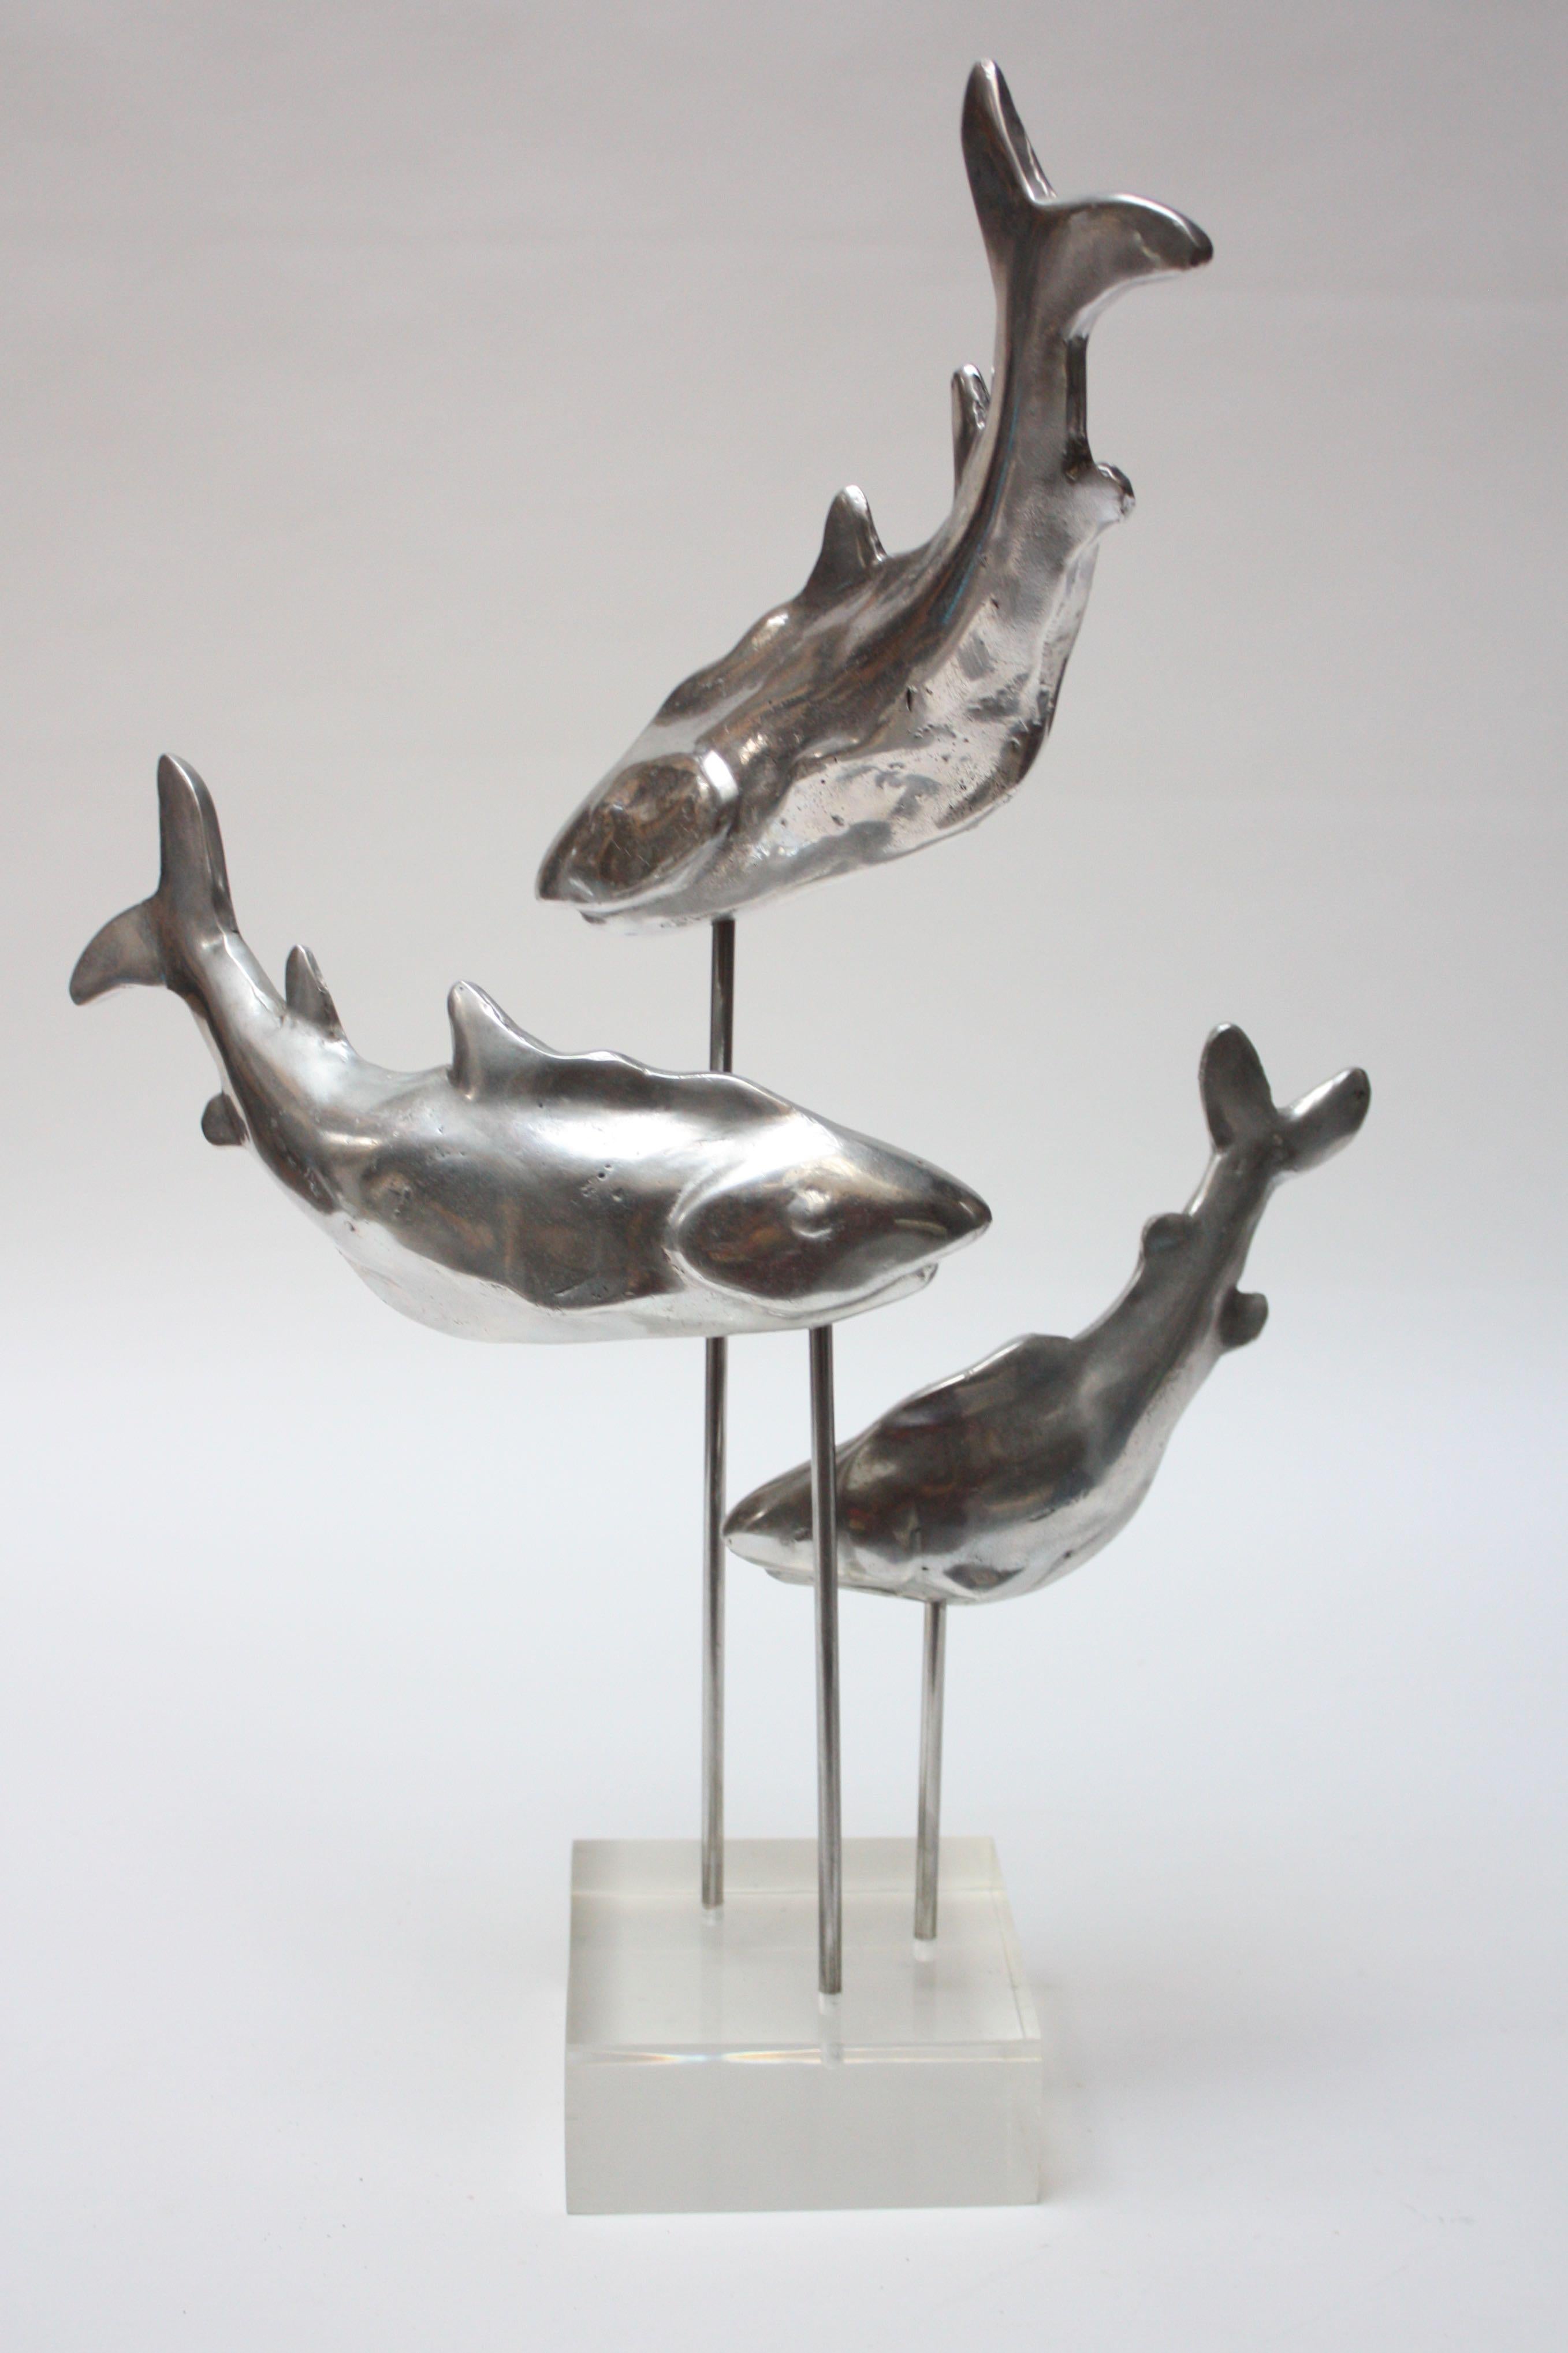 This unique sculpture is composed of three cast-aluminum sharks (representative of a family of sharks given the size disparity between the three) displayed in an ascending spiral formation on rods mounted onto a Lucite base. The sharks can removed